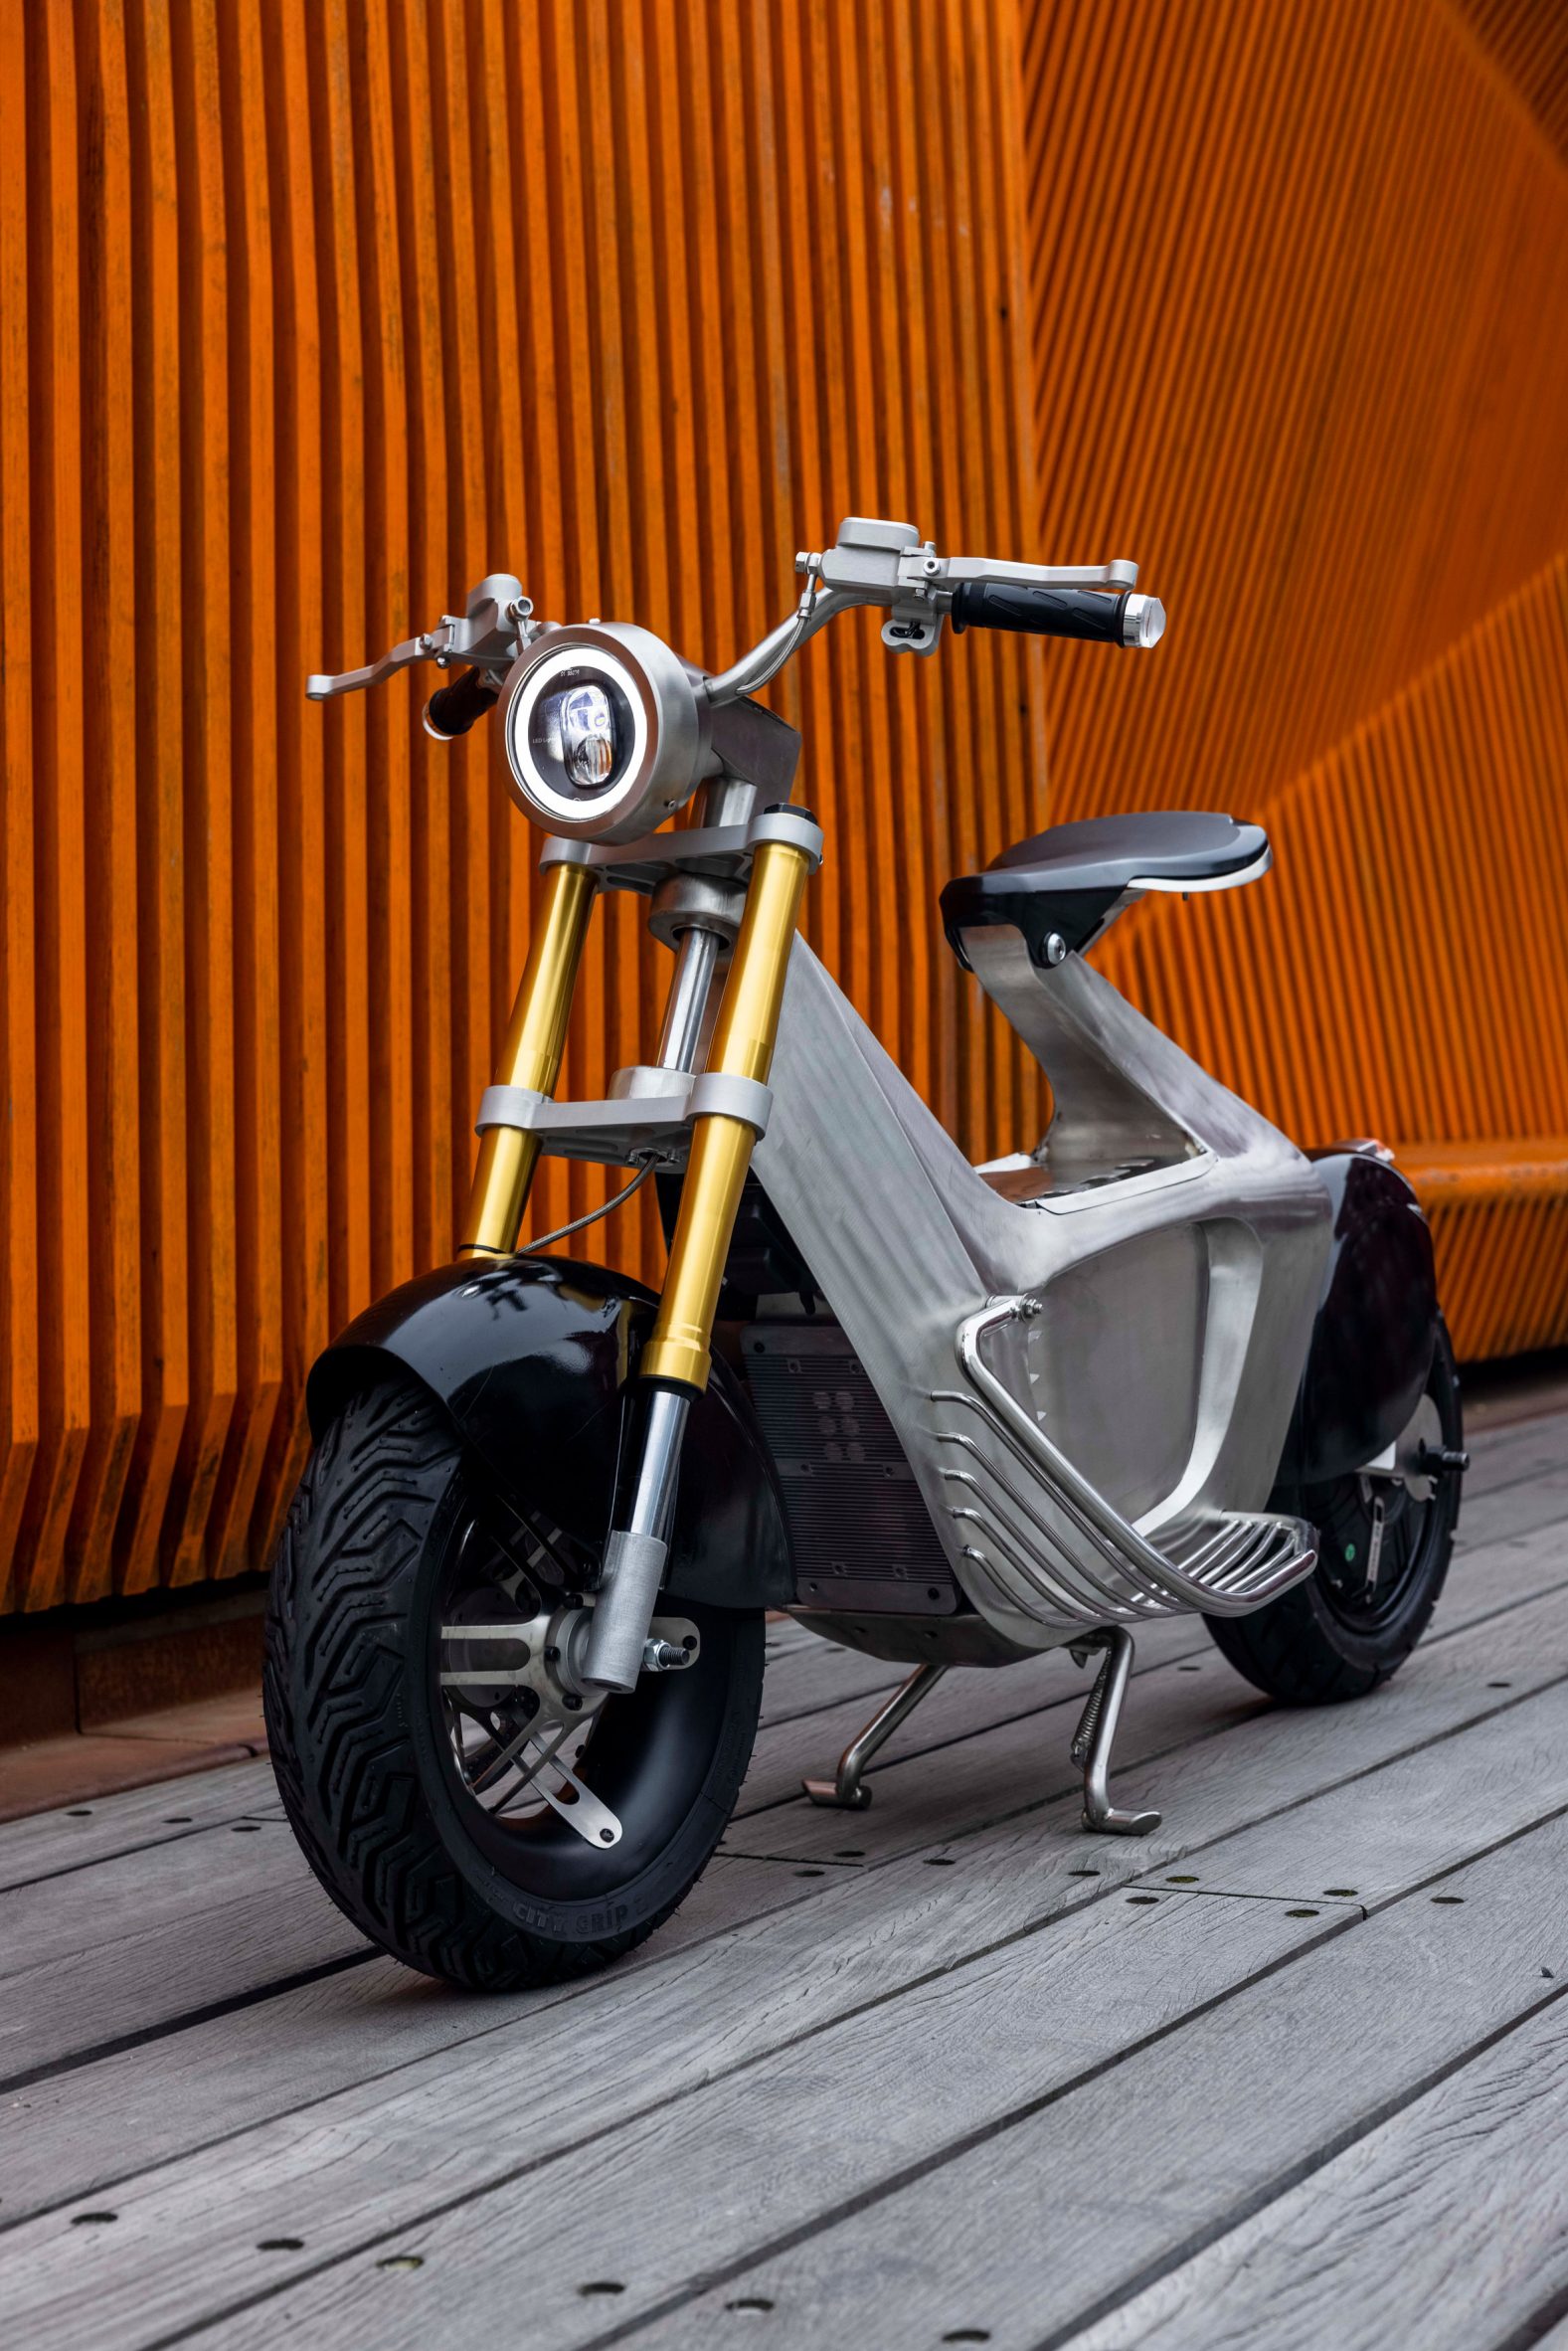 Front view of SUS1 scooter